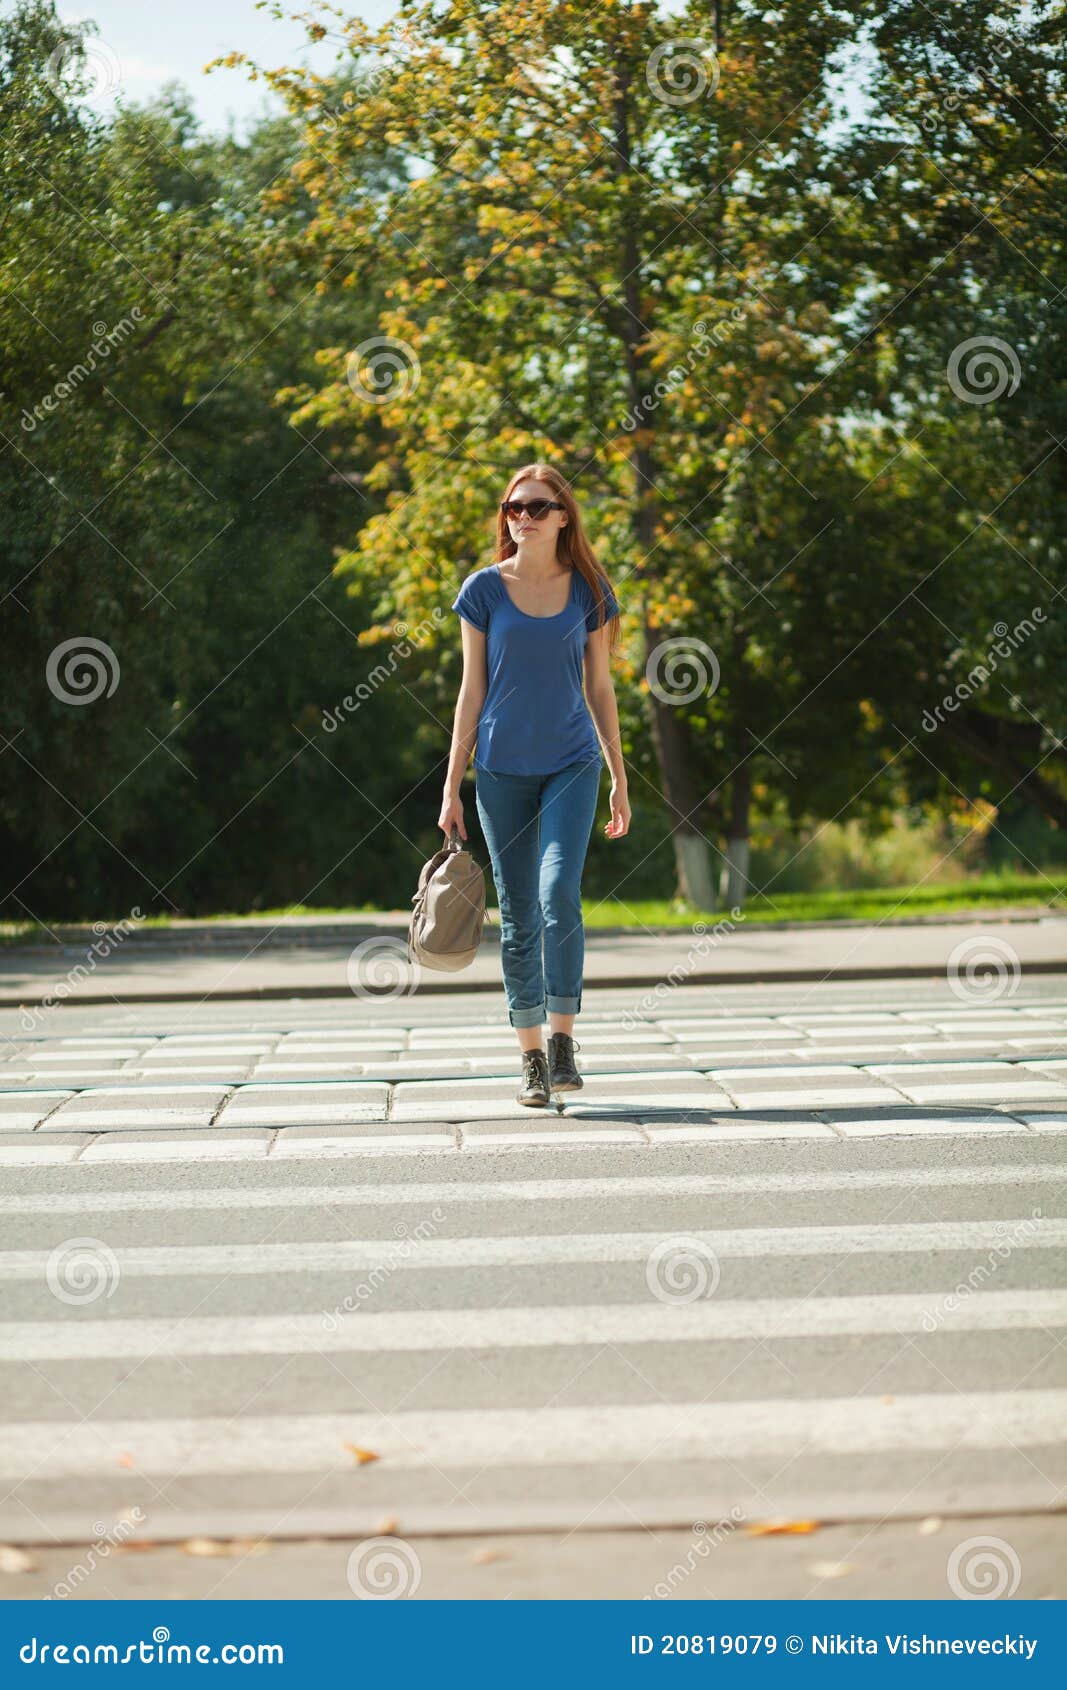 Girl with a Bag Goes the Way of Pedestrian Zebra Stock Image - Image of ...